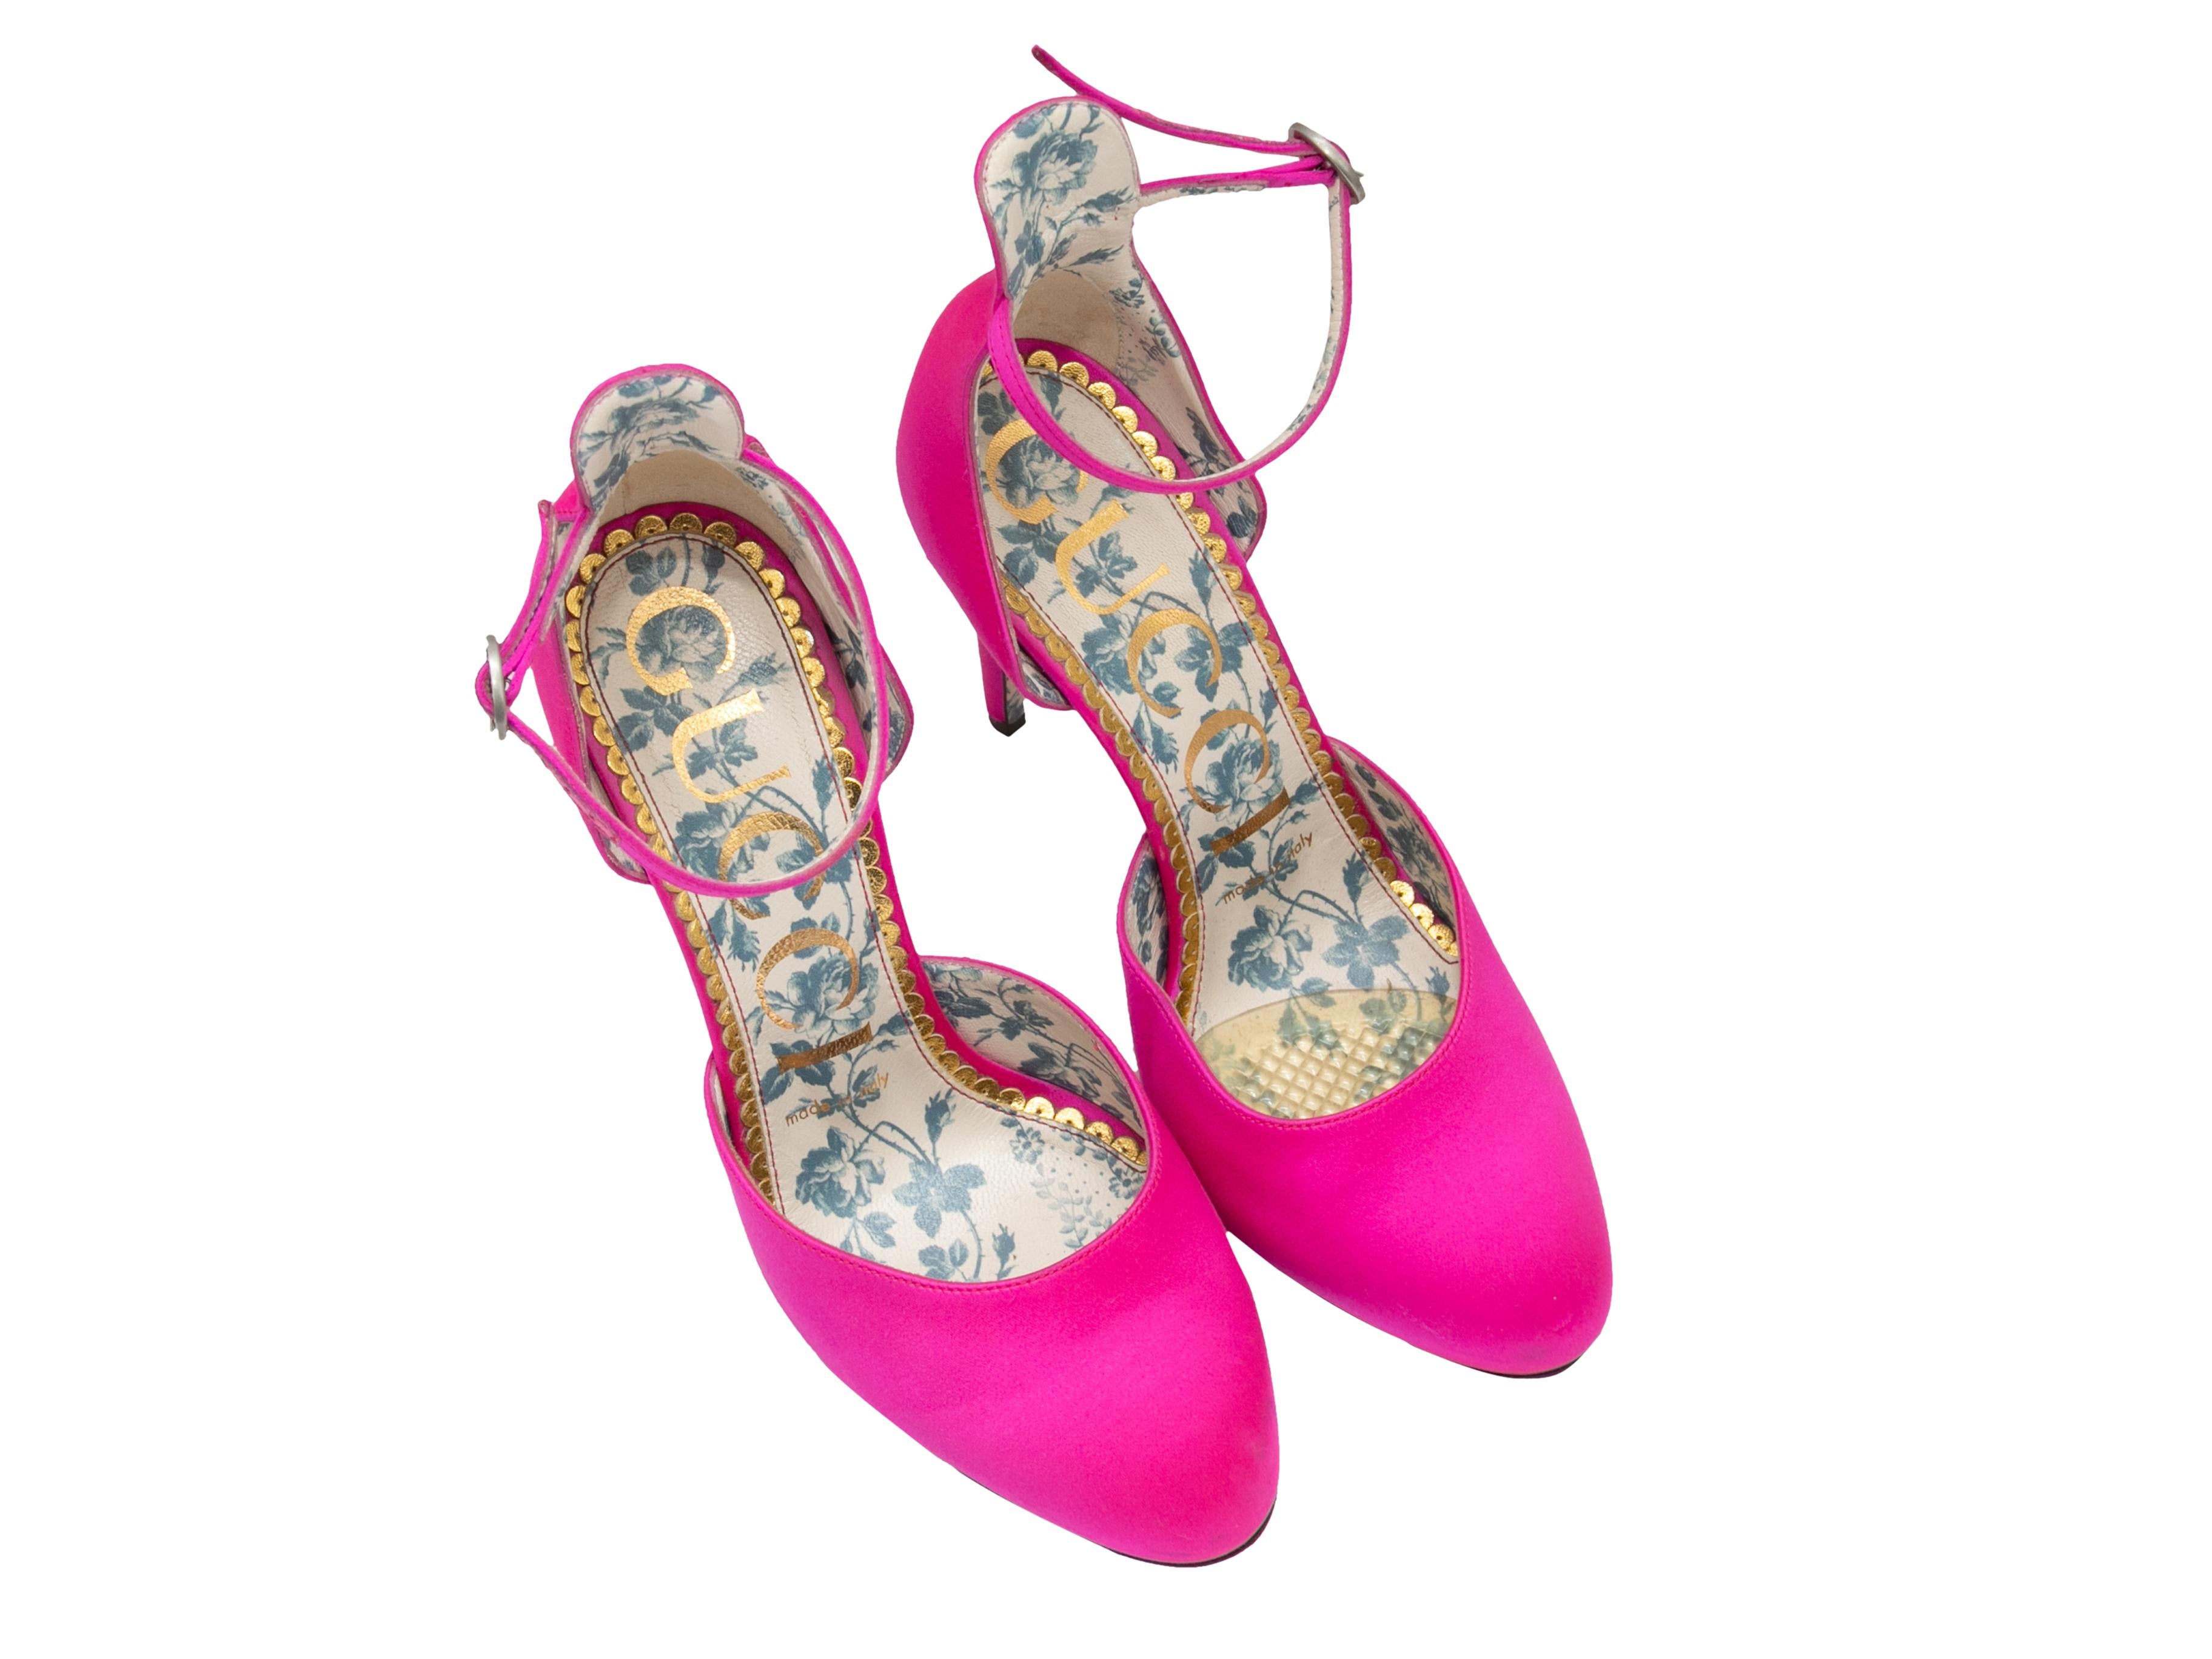 Hot pink satin pumps by Gucci. Crystal-embellished buckle closures at ankle straps. 4